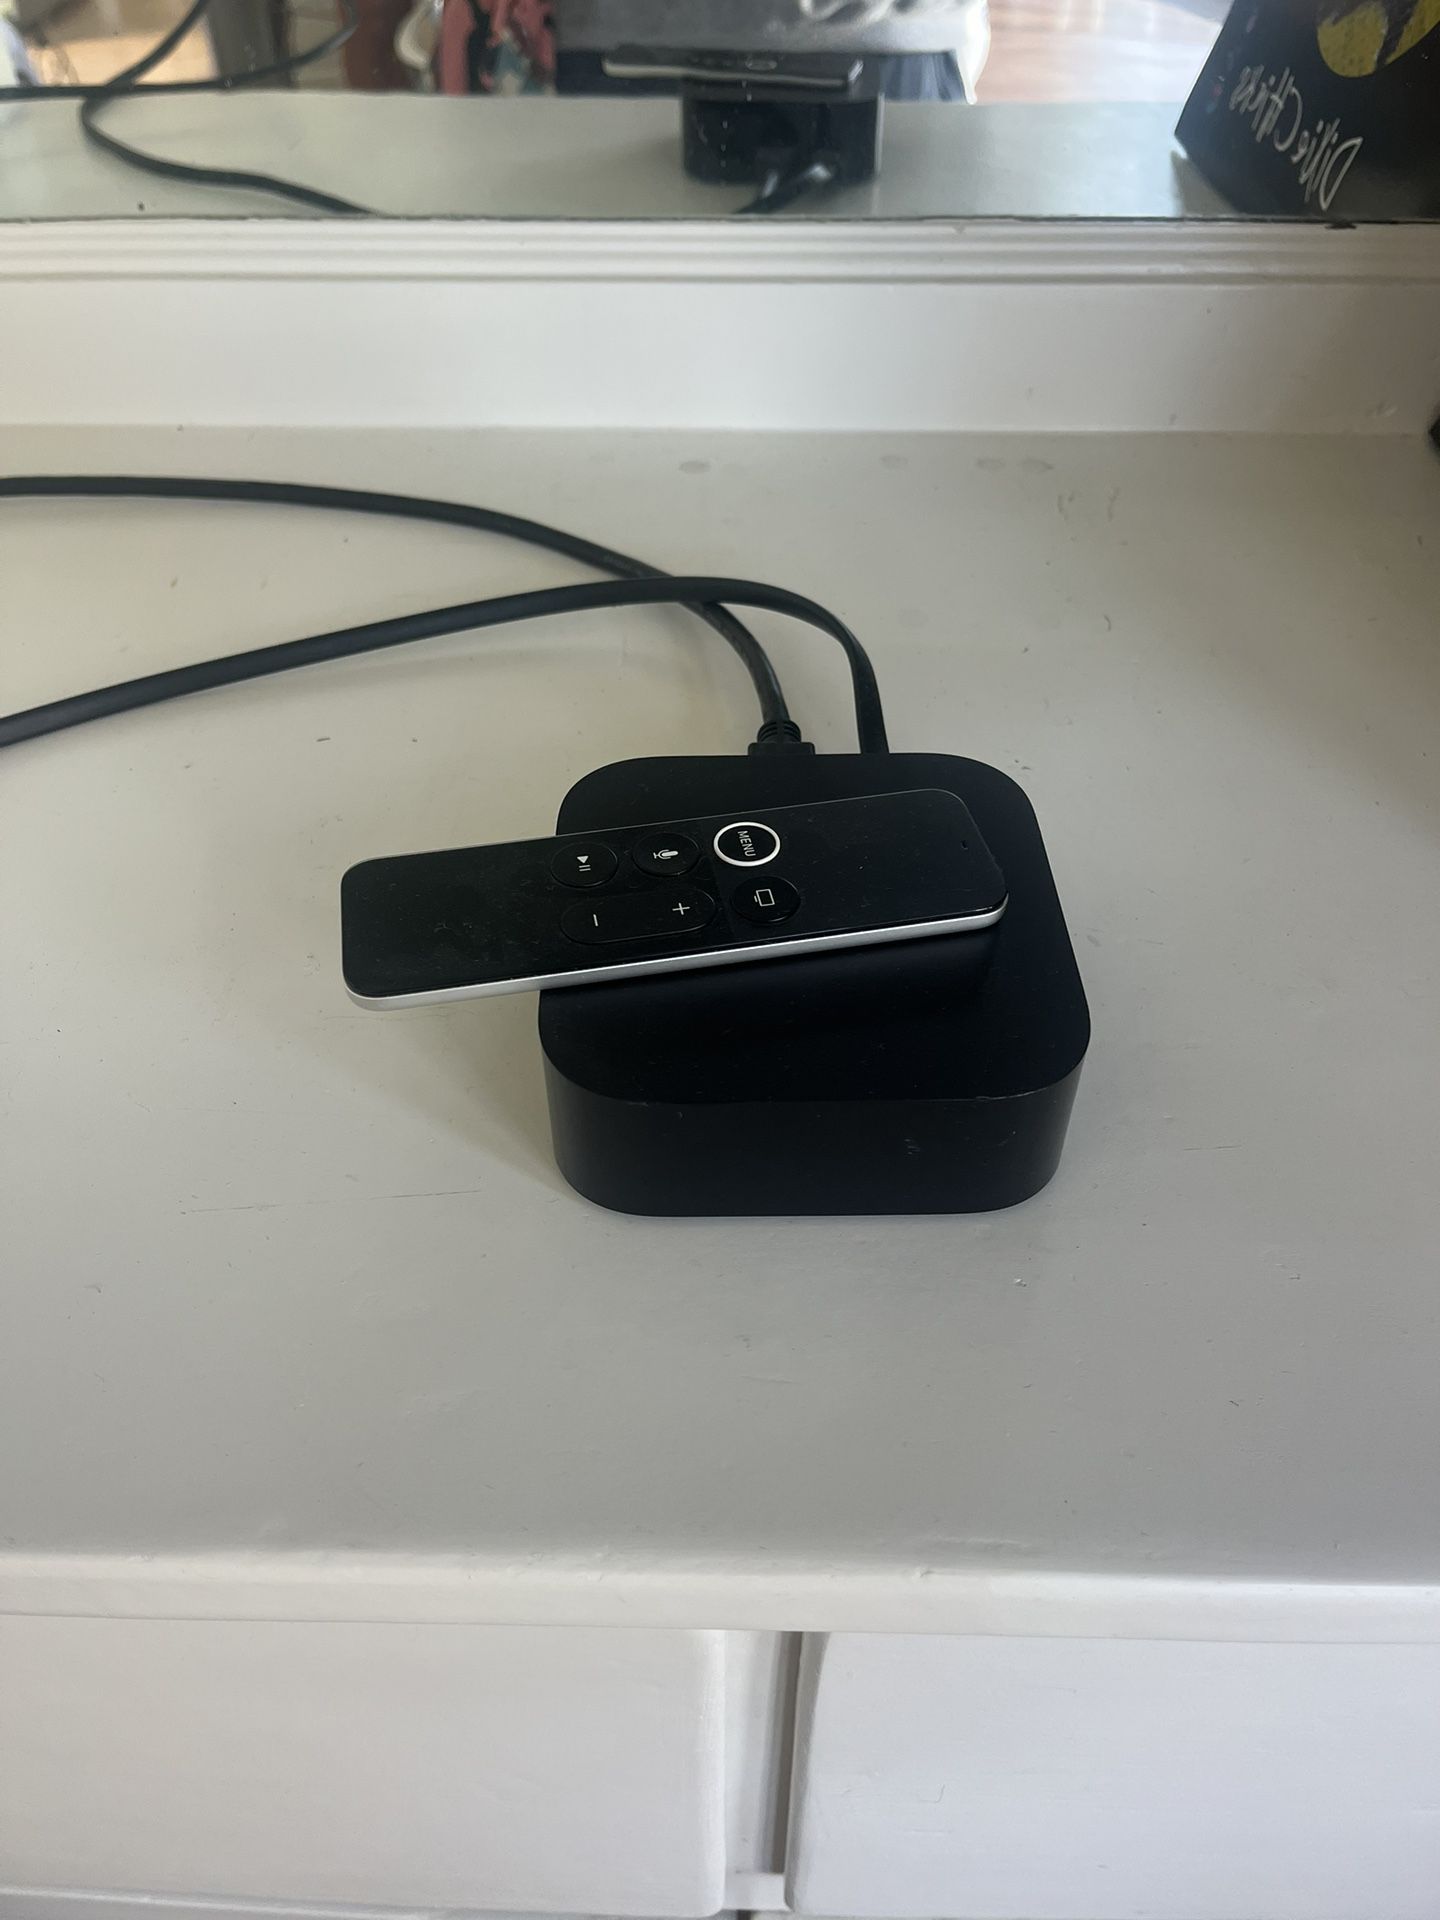 Apple TV Gen 4 With Cords And Remote